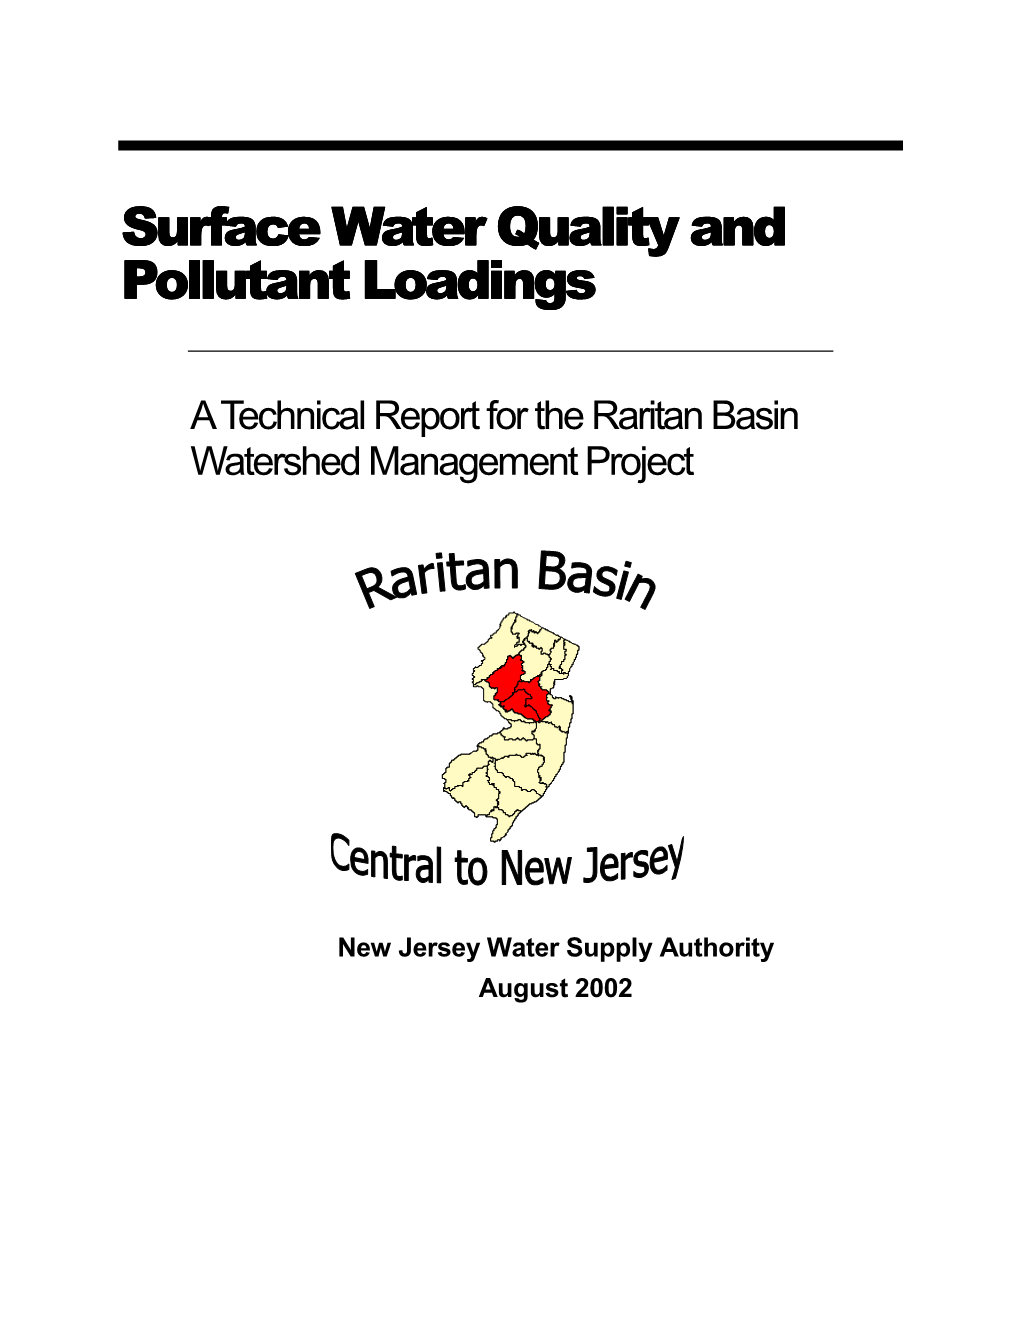 Surface Water Quality and Pollutant Loadings